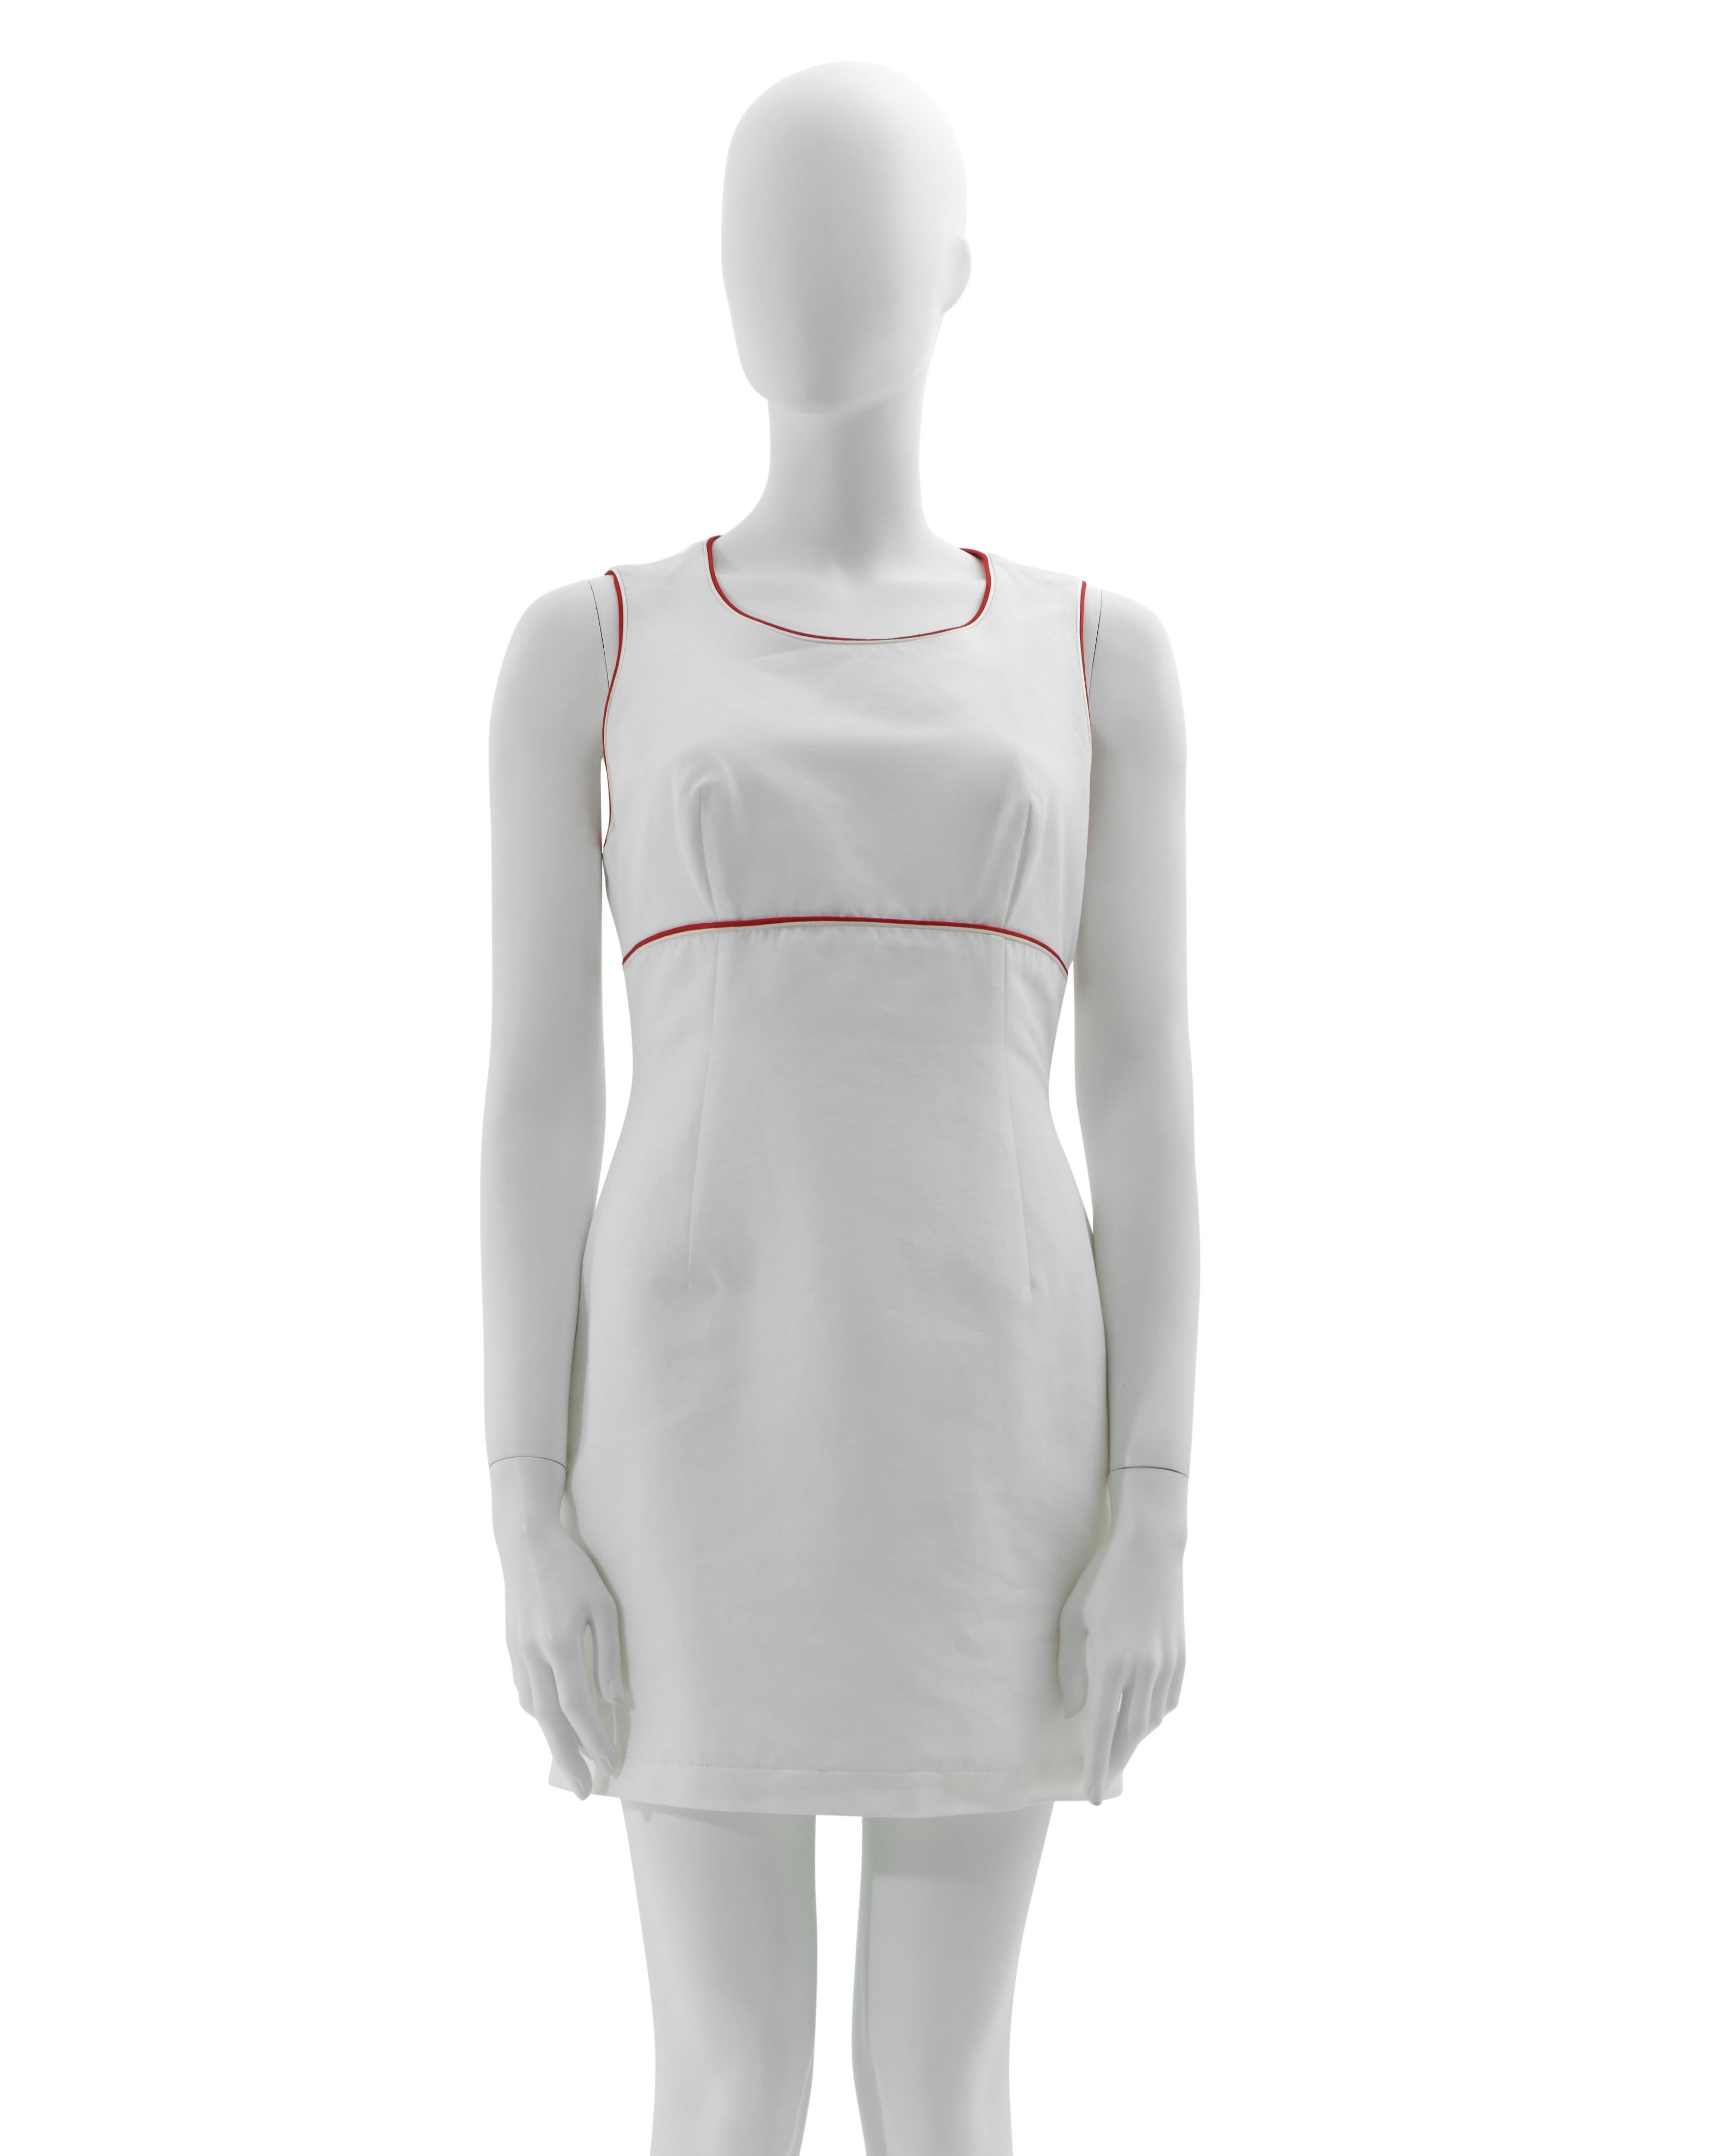 Gray Versus by Gianni Versace Early 1990s White cotton dress and crop jacket set